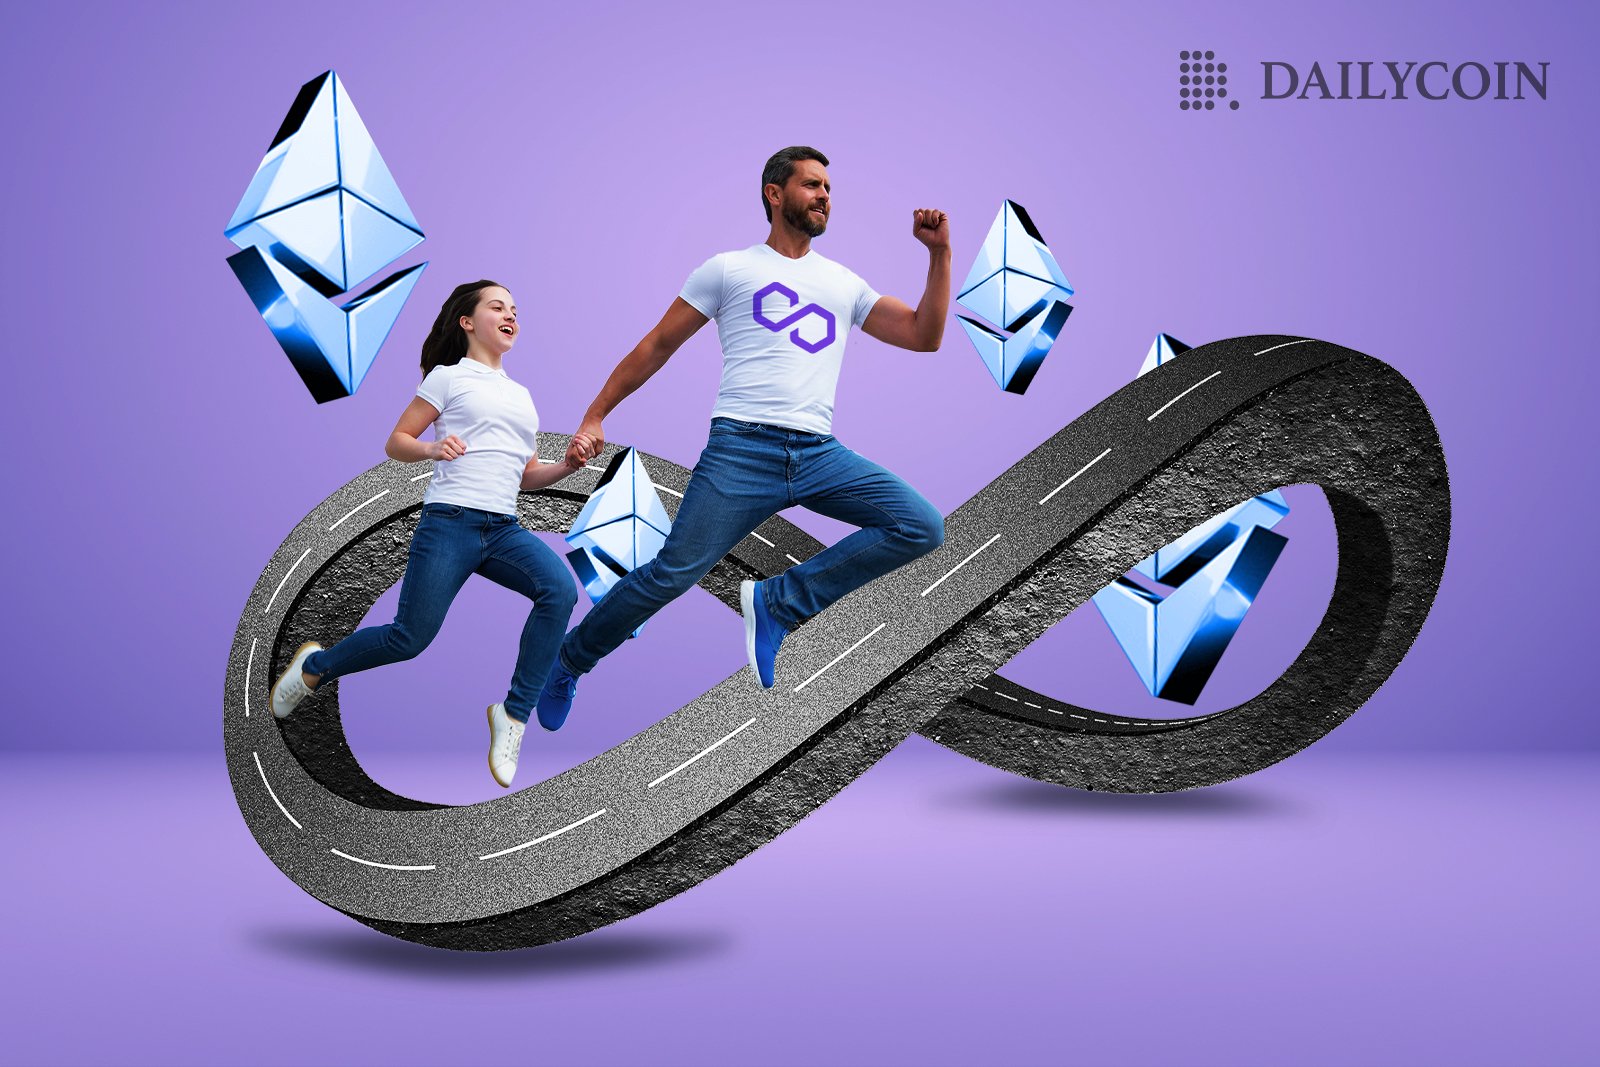 A woman together with a man wearing Polygon t-shirt running on an infinity shaped road below floating light blue Ethereum signs.